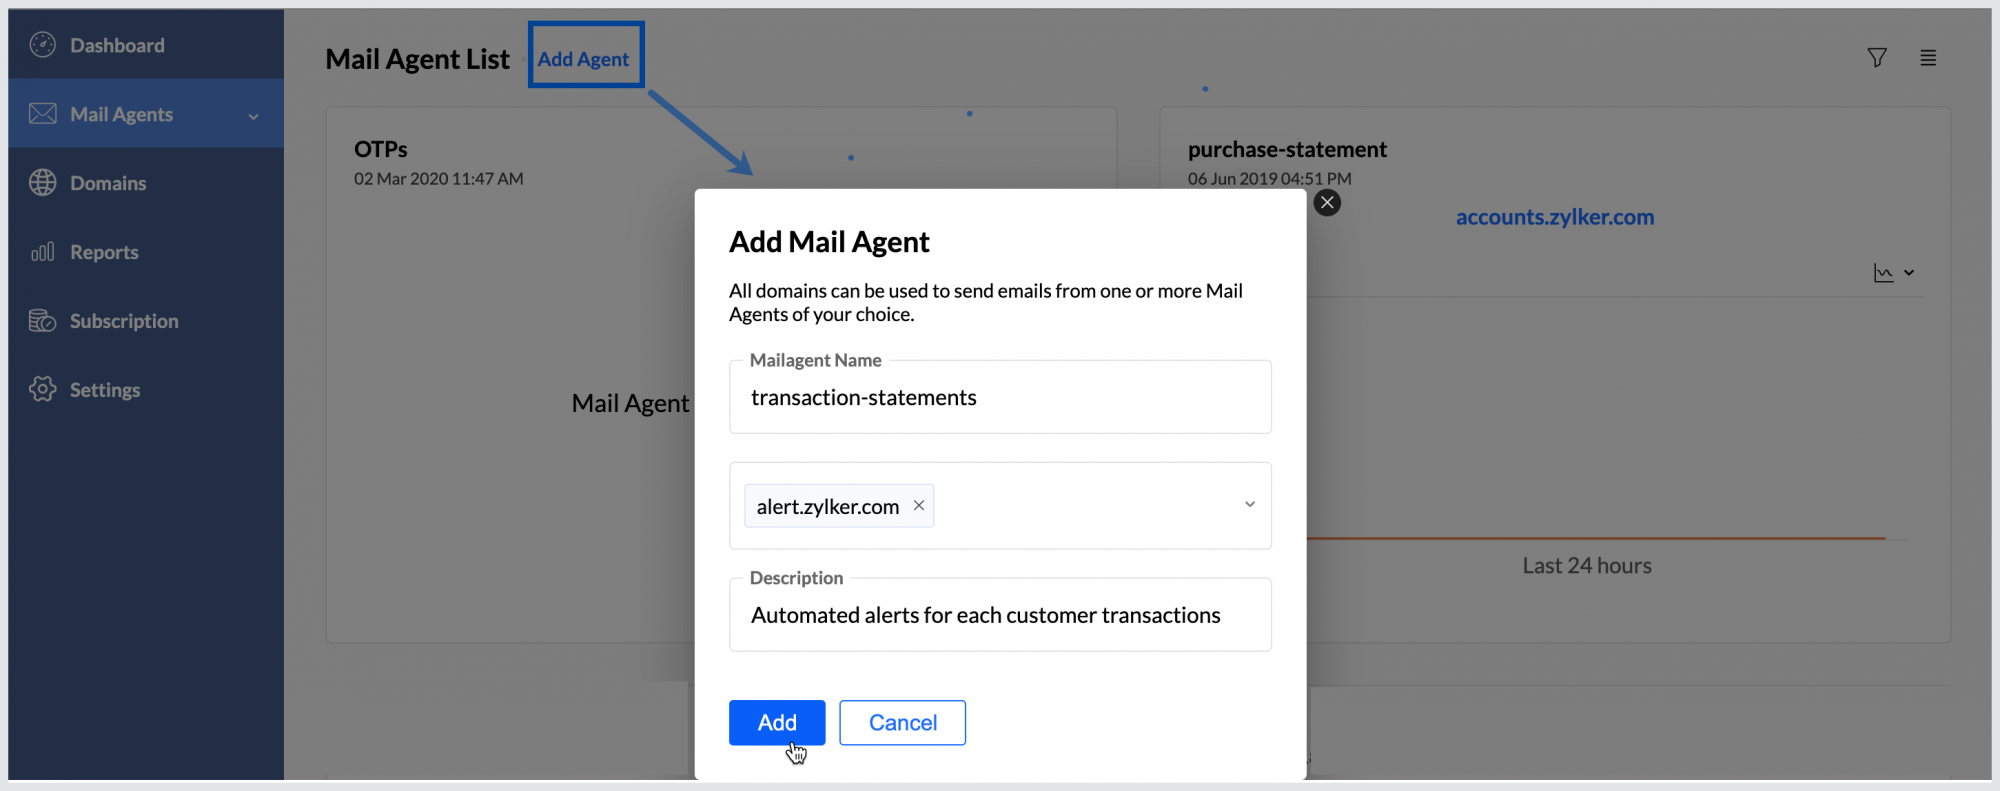 Create a Mail Agent